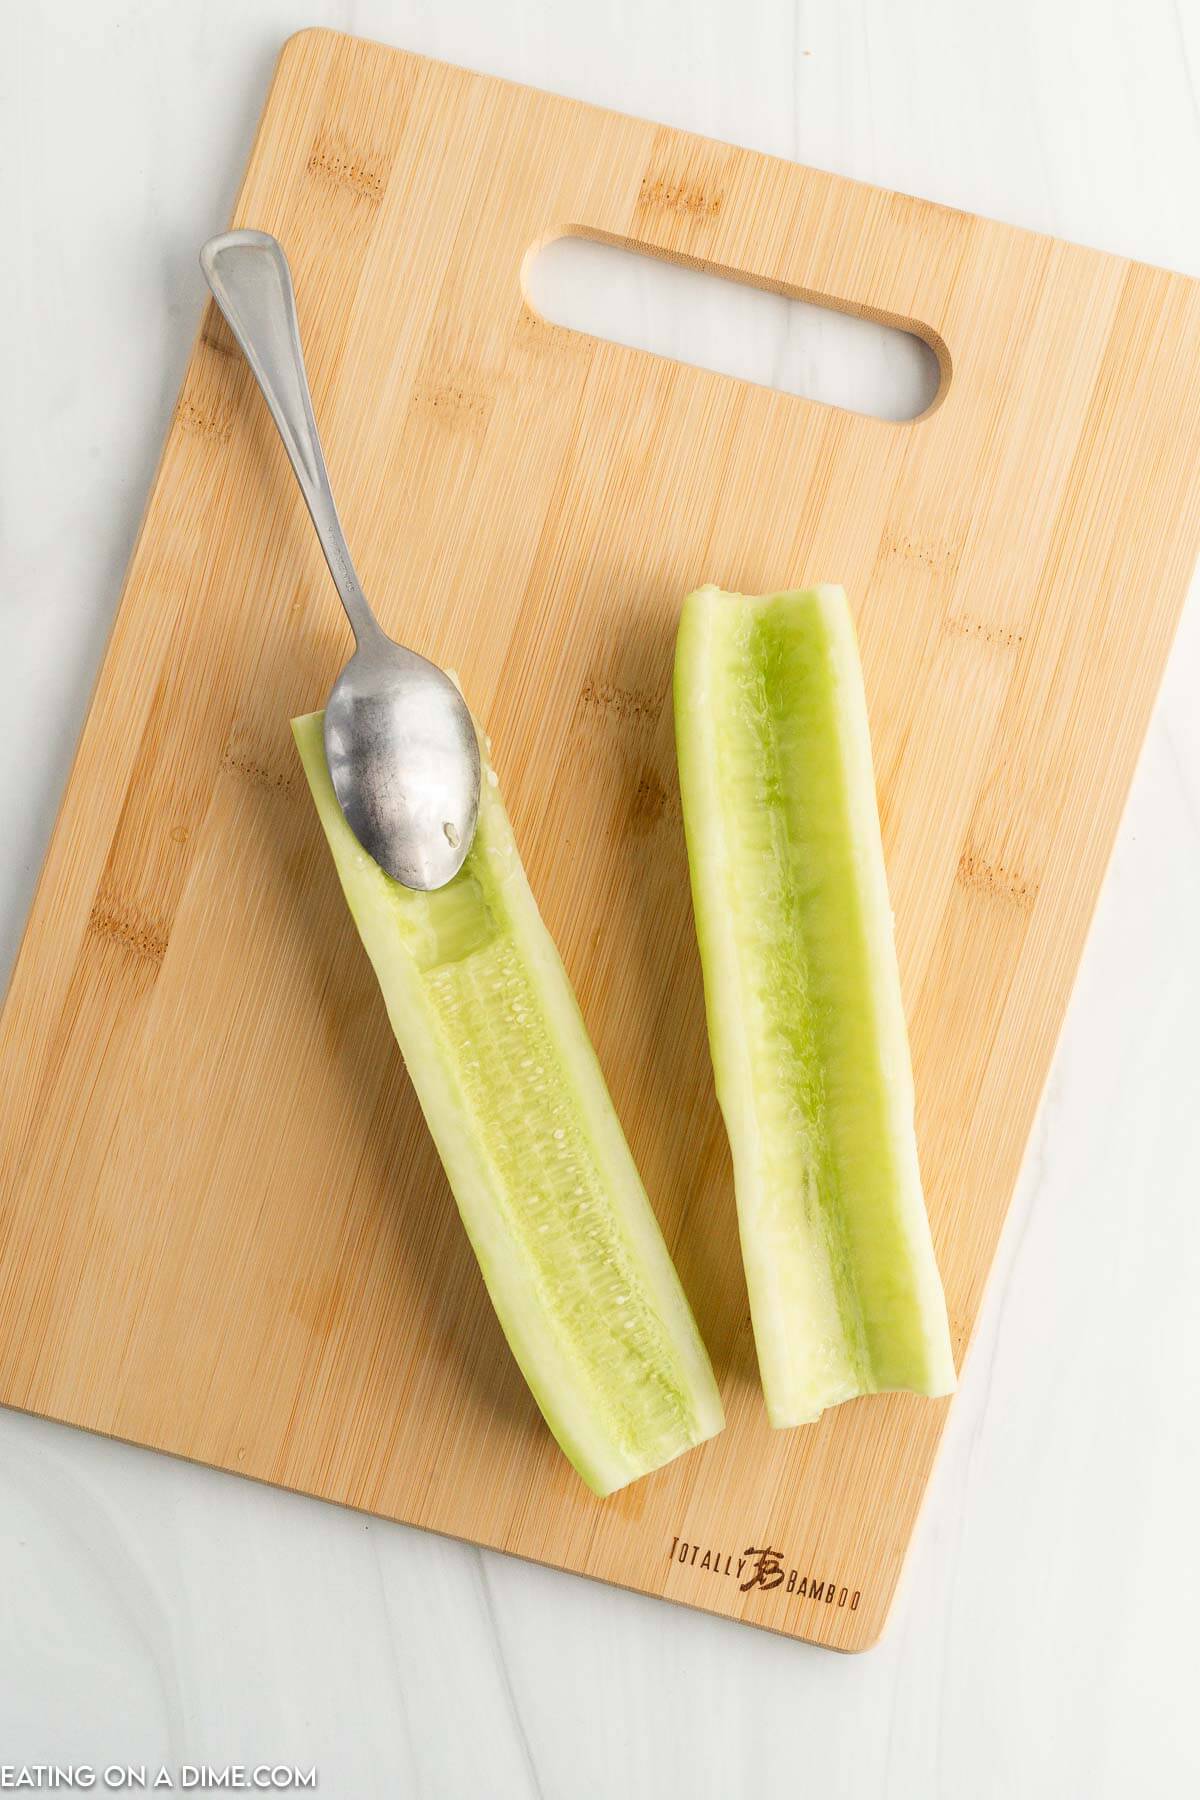 Peel and remove seeds from cucumber